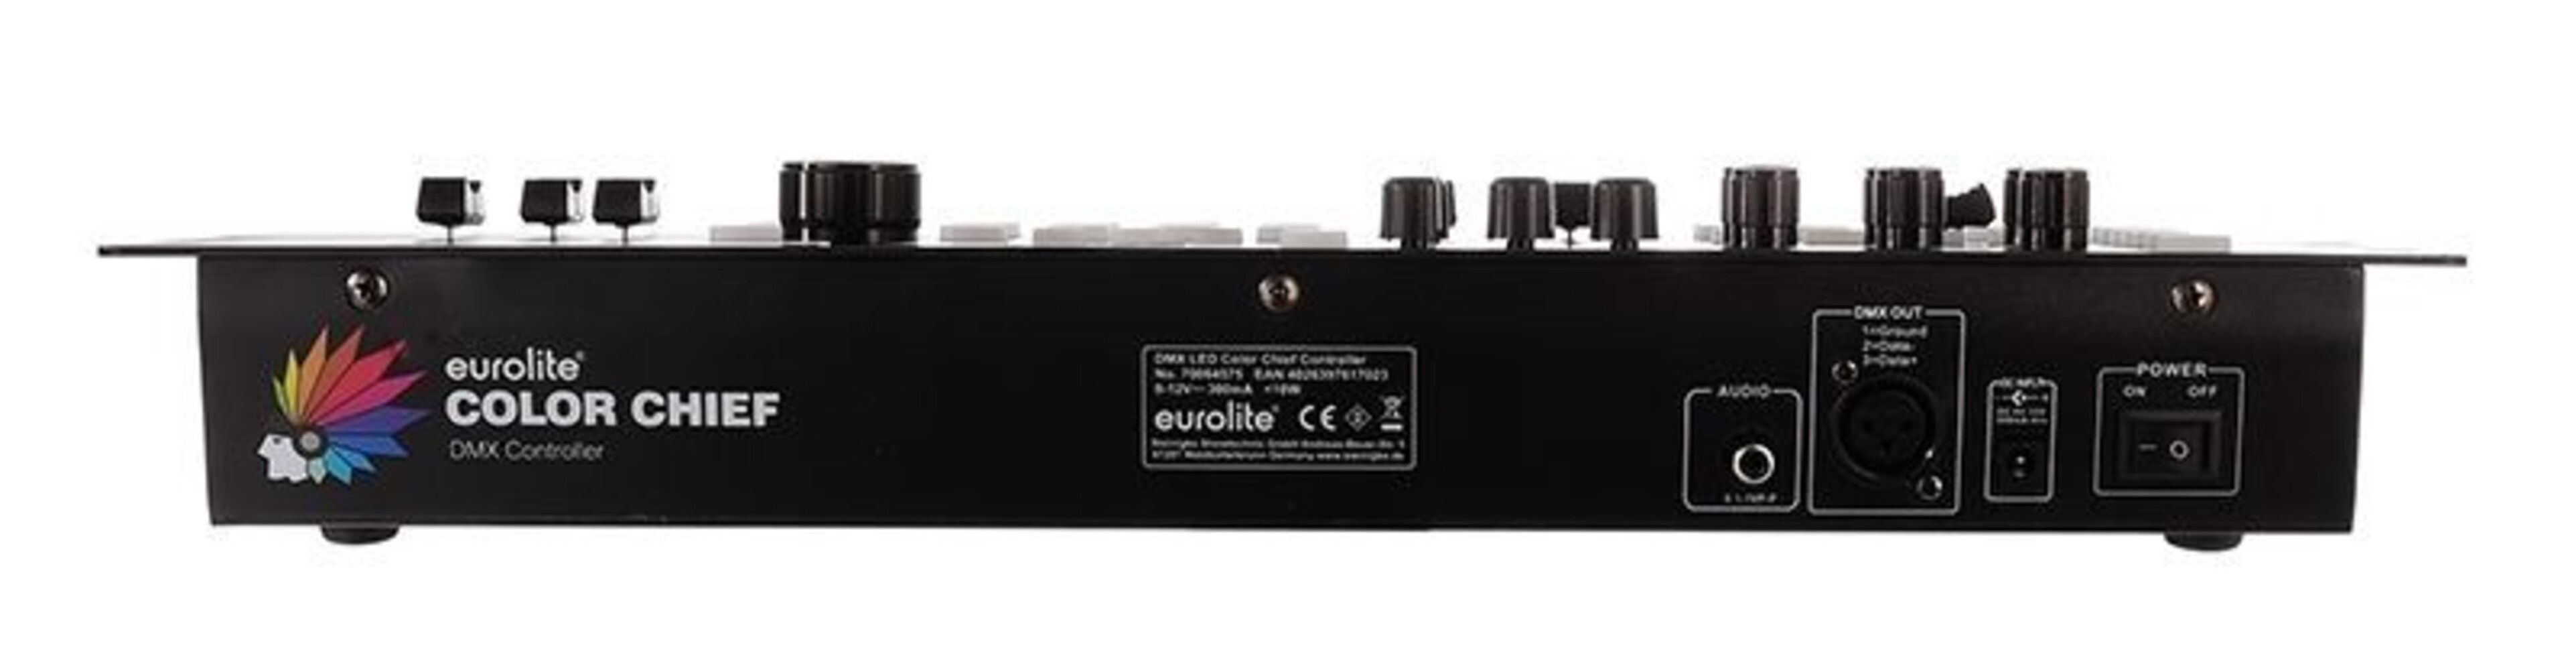 High-quality Eurolite Controller with adjustable voltage and DMX512 feature